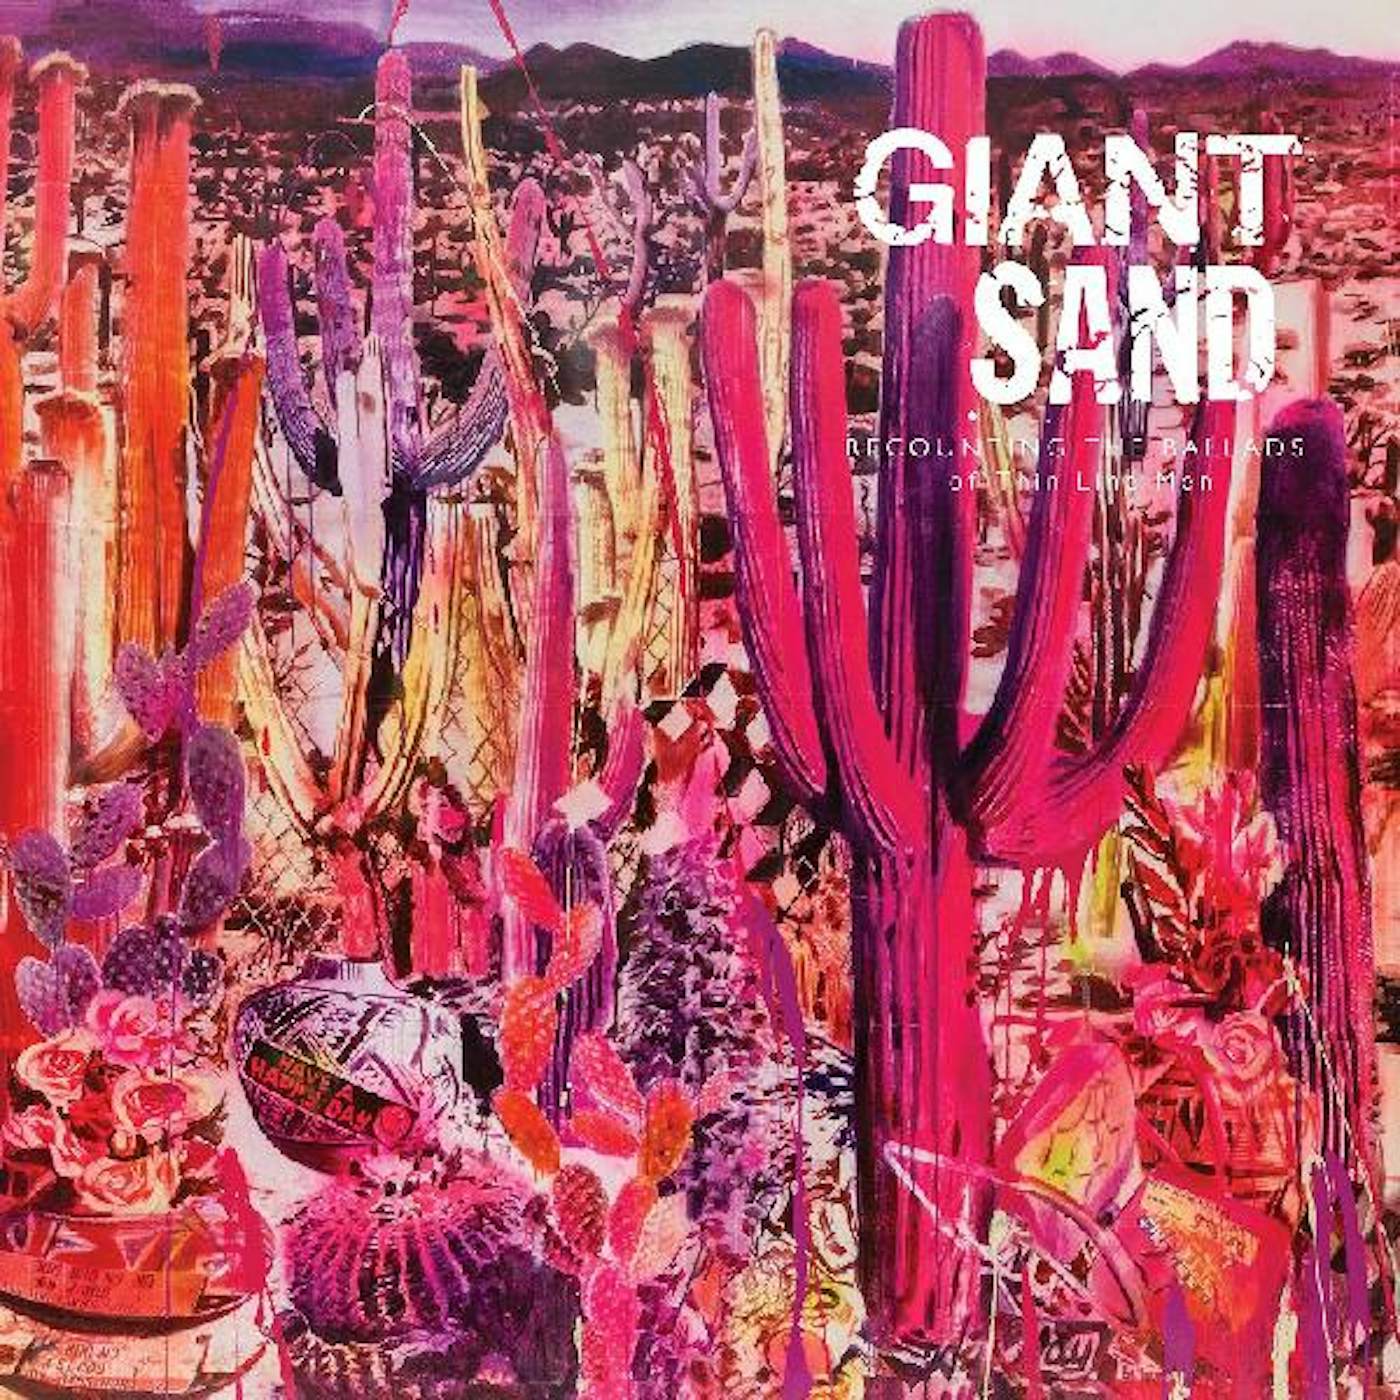 Giant Sand RECOUNTING THE BALLADS OF THIN LINE MEN CD